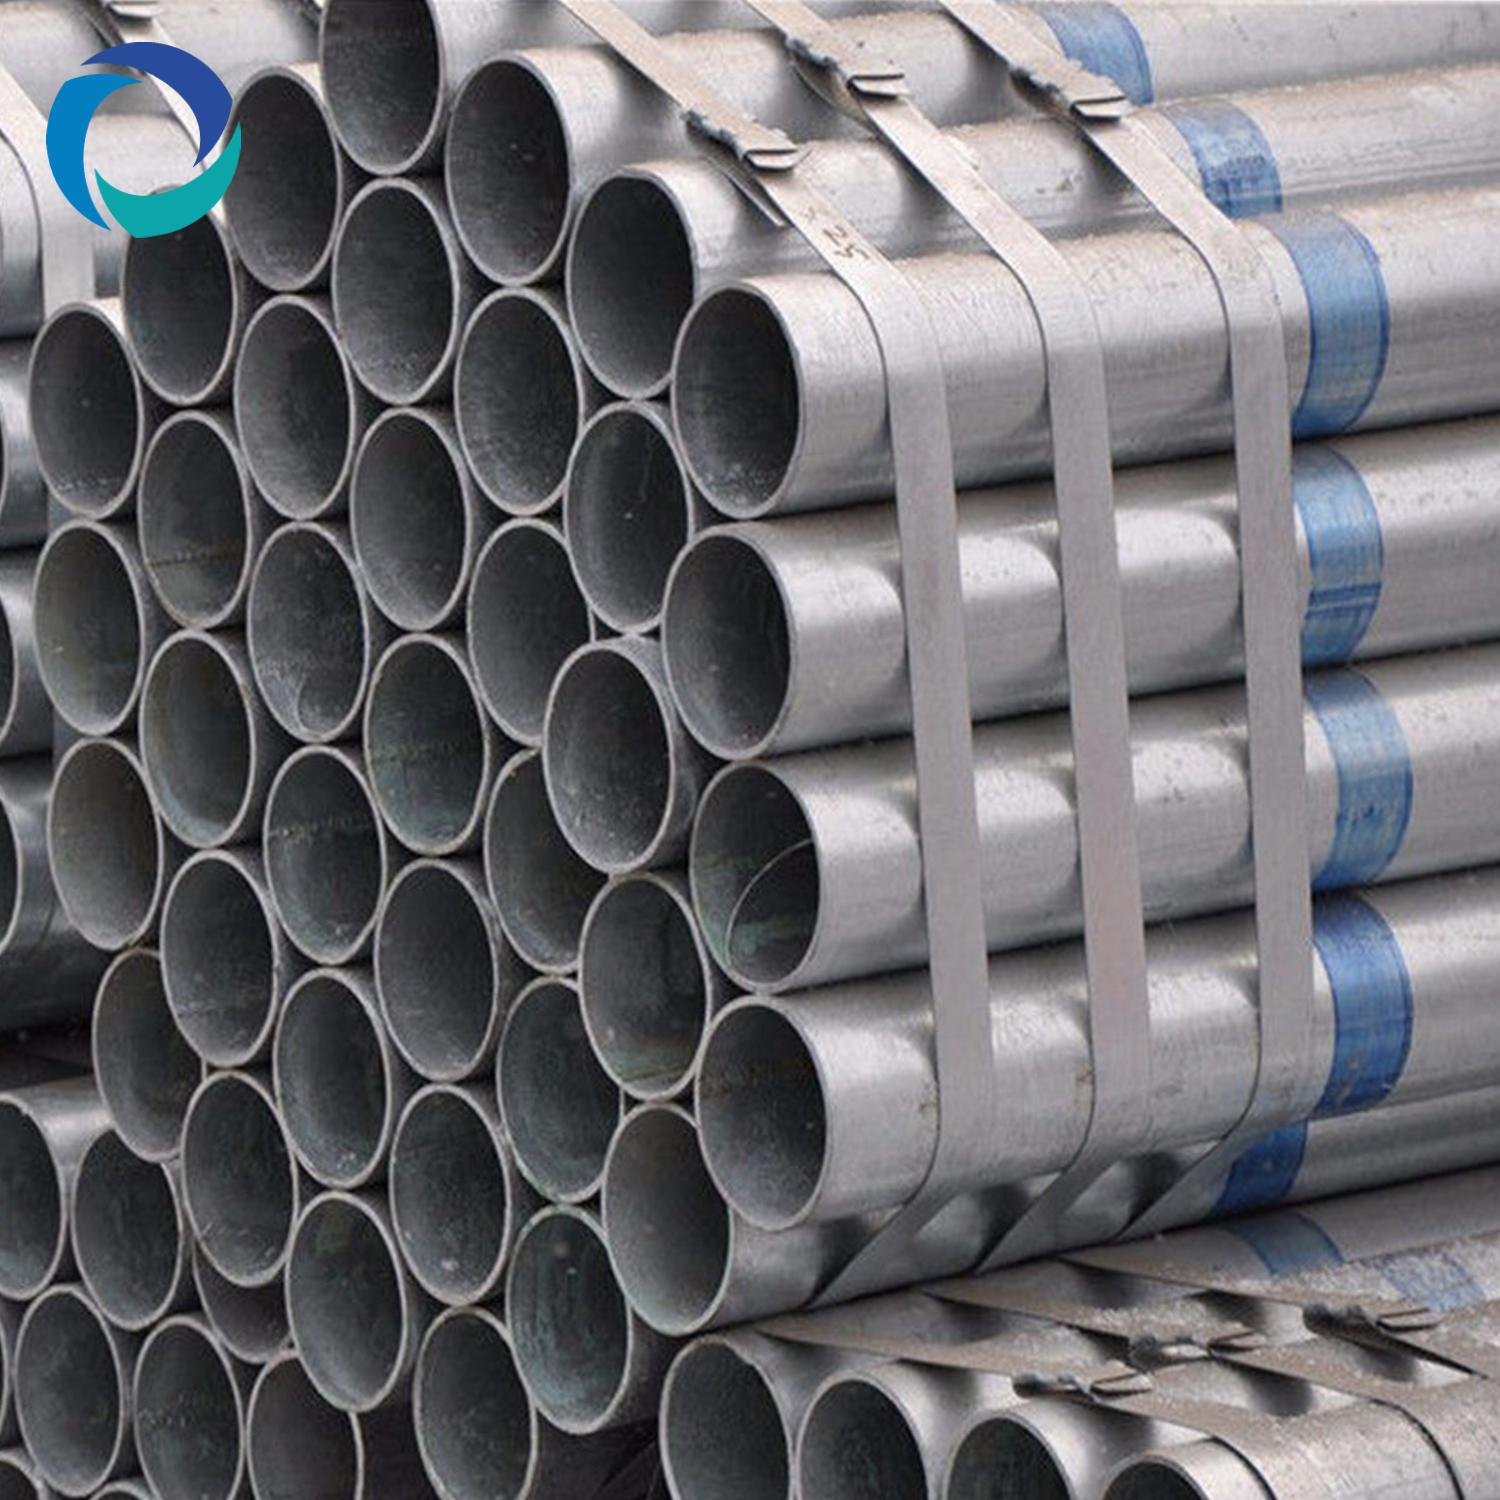 carbon steel blue band 1.75 galvanized pipe 5